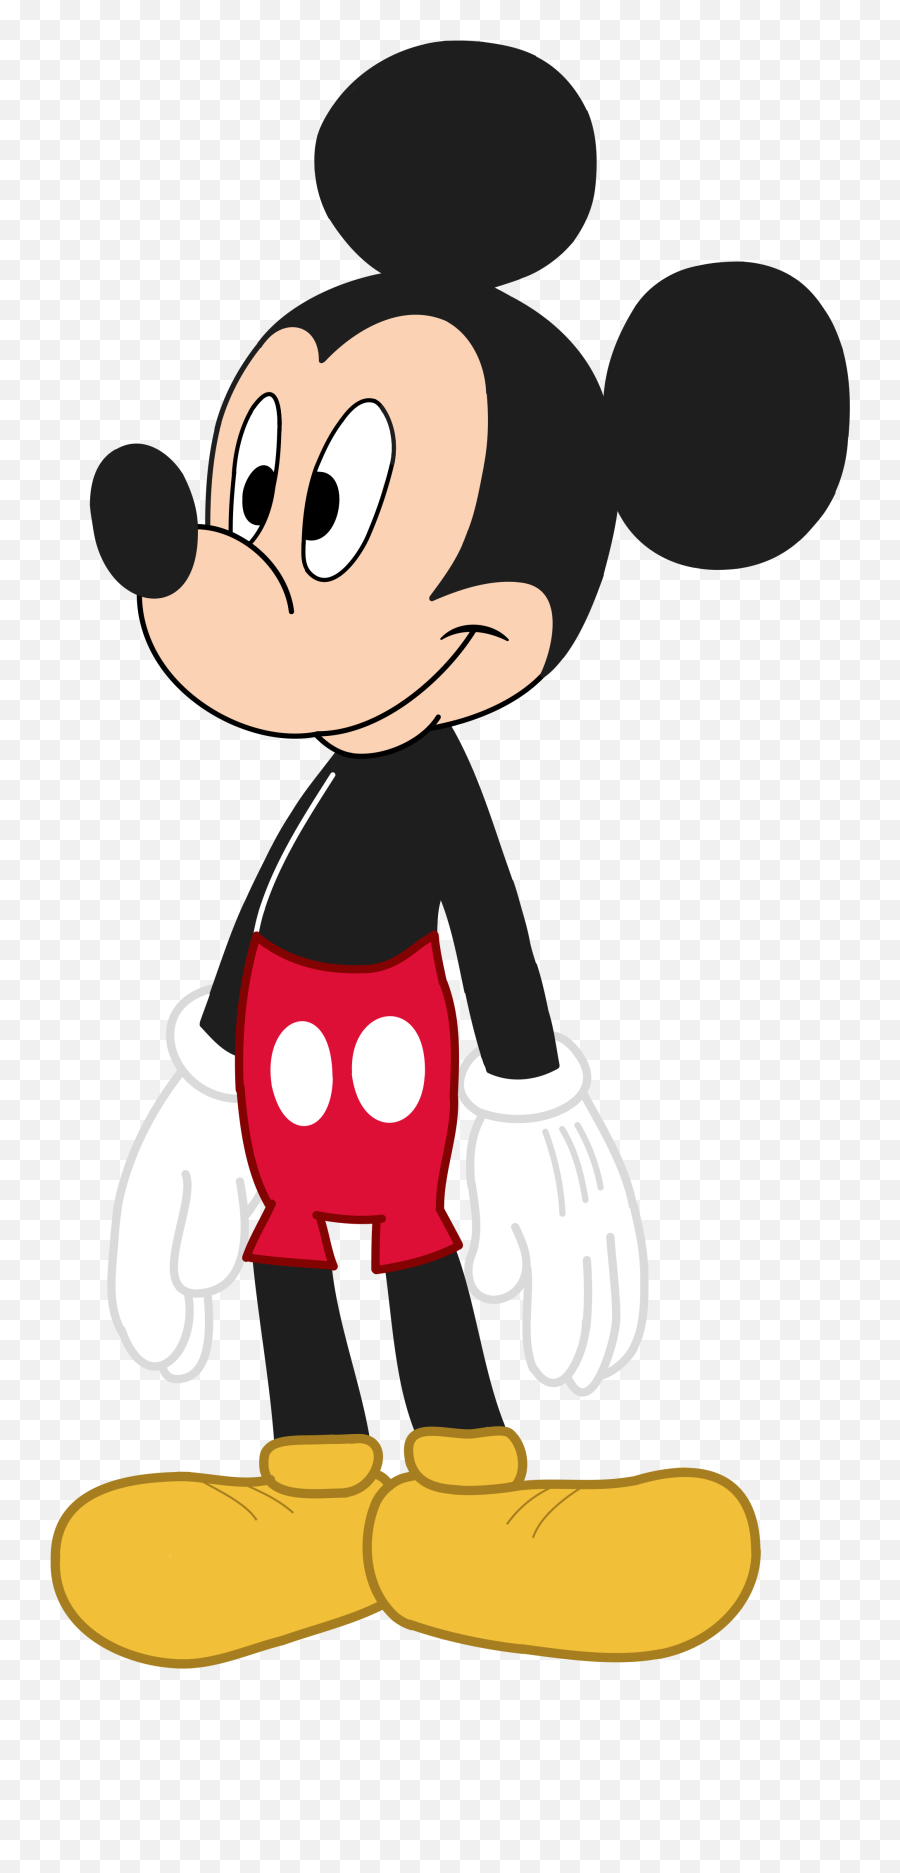 Cool Wallpaper Mickey Mouse Supreme - Wallpaper Hd New Fictional Character Emoji,Mickey Mouse Emoji Android